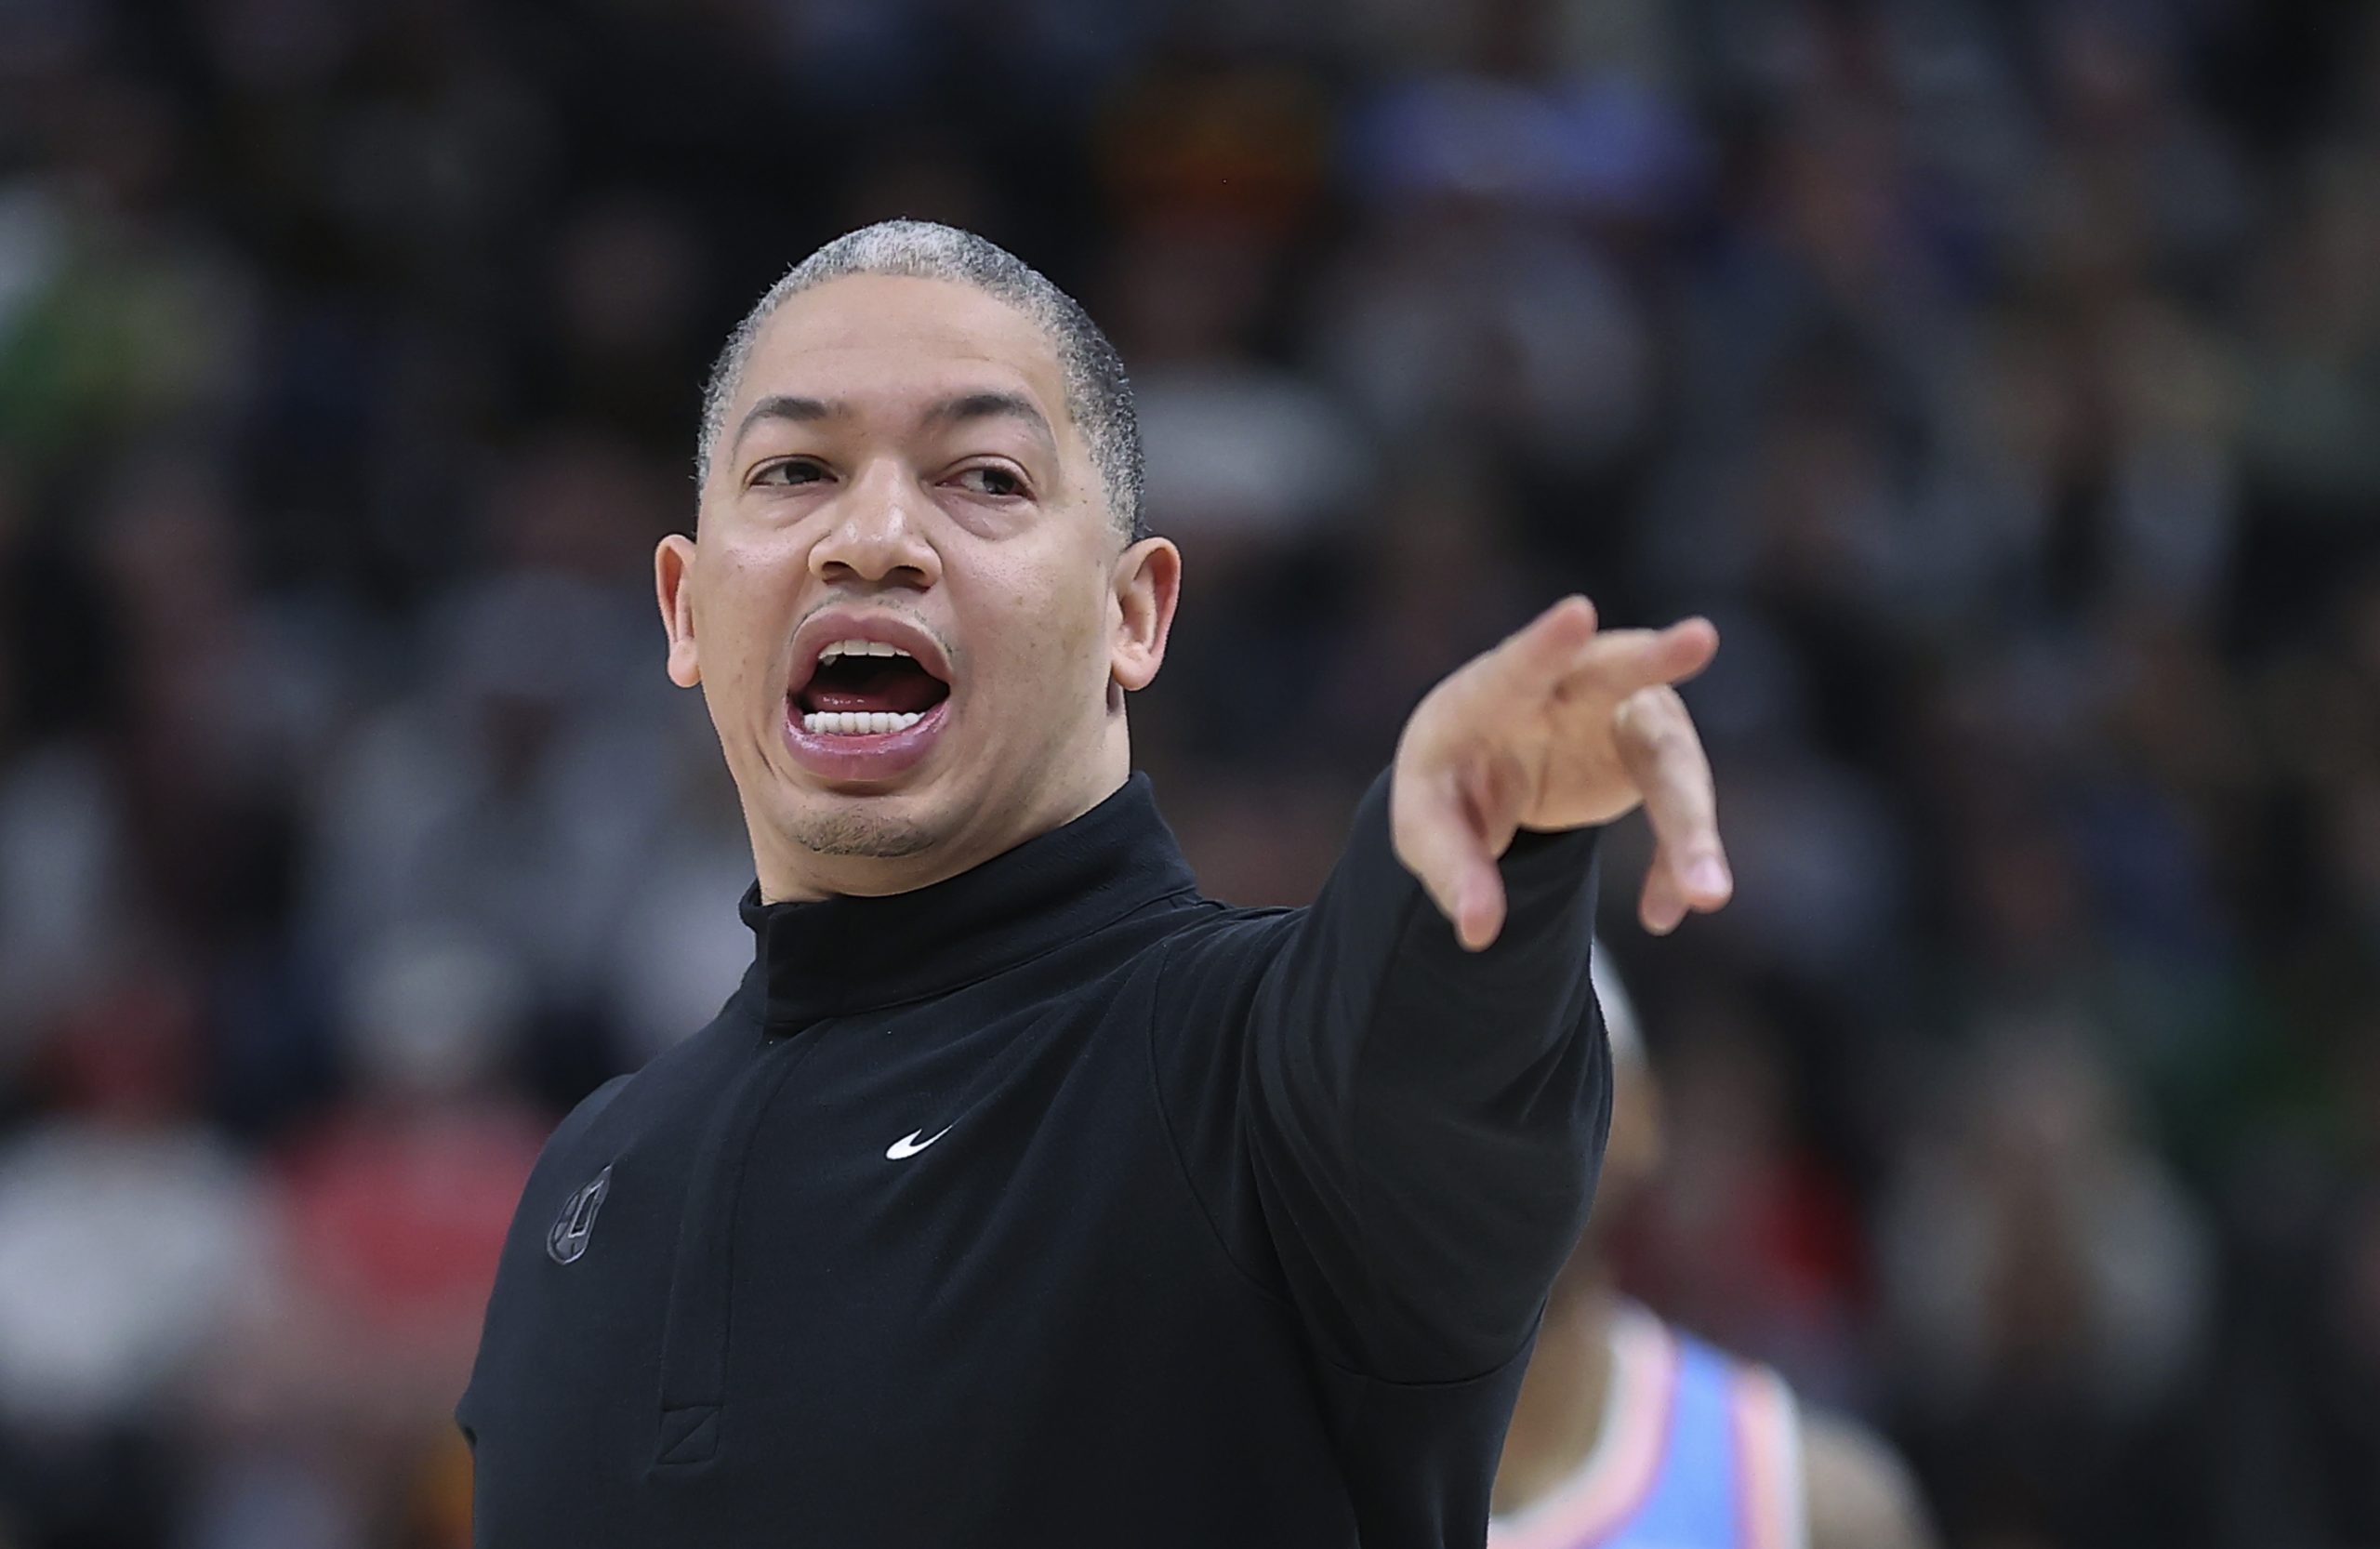 Los Angeles Clippers head coach Ty Lue used Sixers president Daryl Morey's controversial China tweet to stir the pot more following the free throws feud